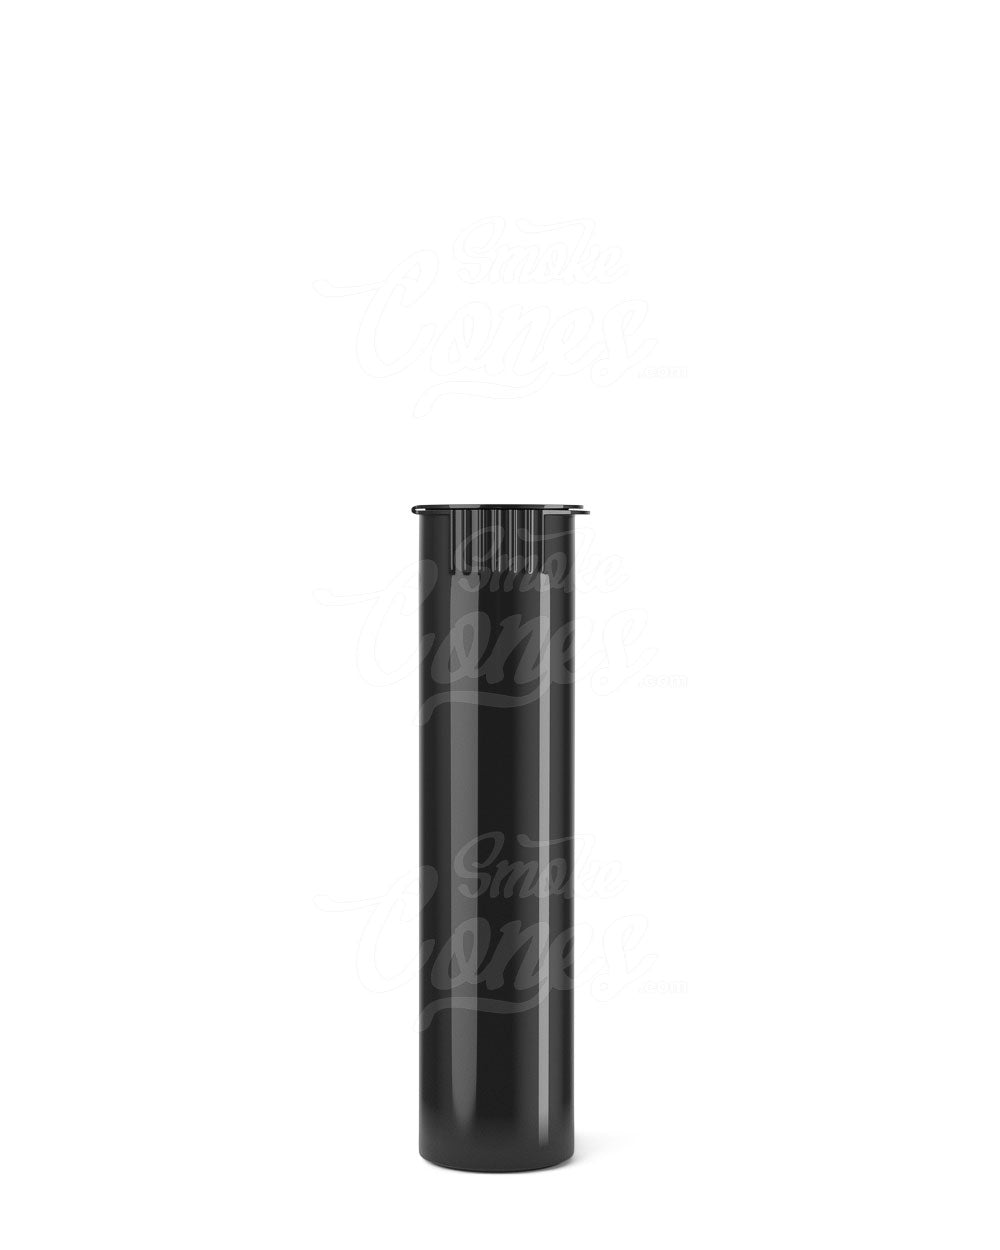 78mm Child Resistant King Size Pop Top Opaque Black Plastic Open Pre-Roll Tubes 1200/Box